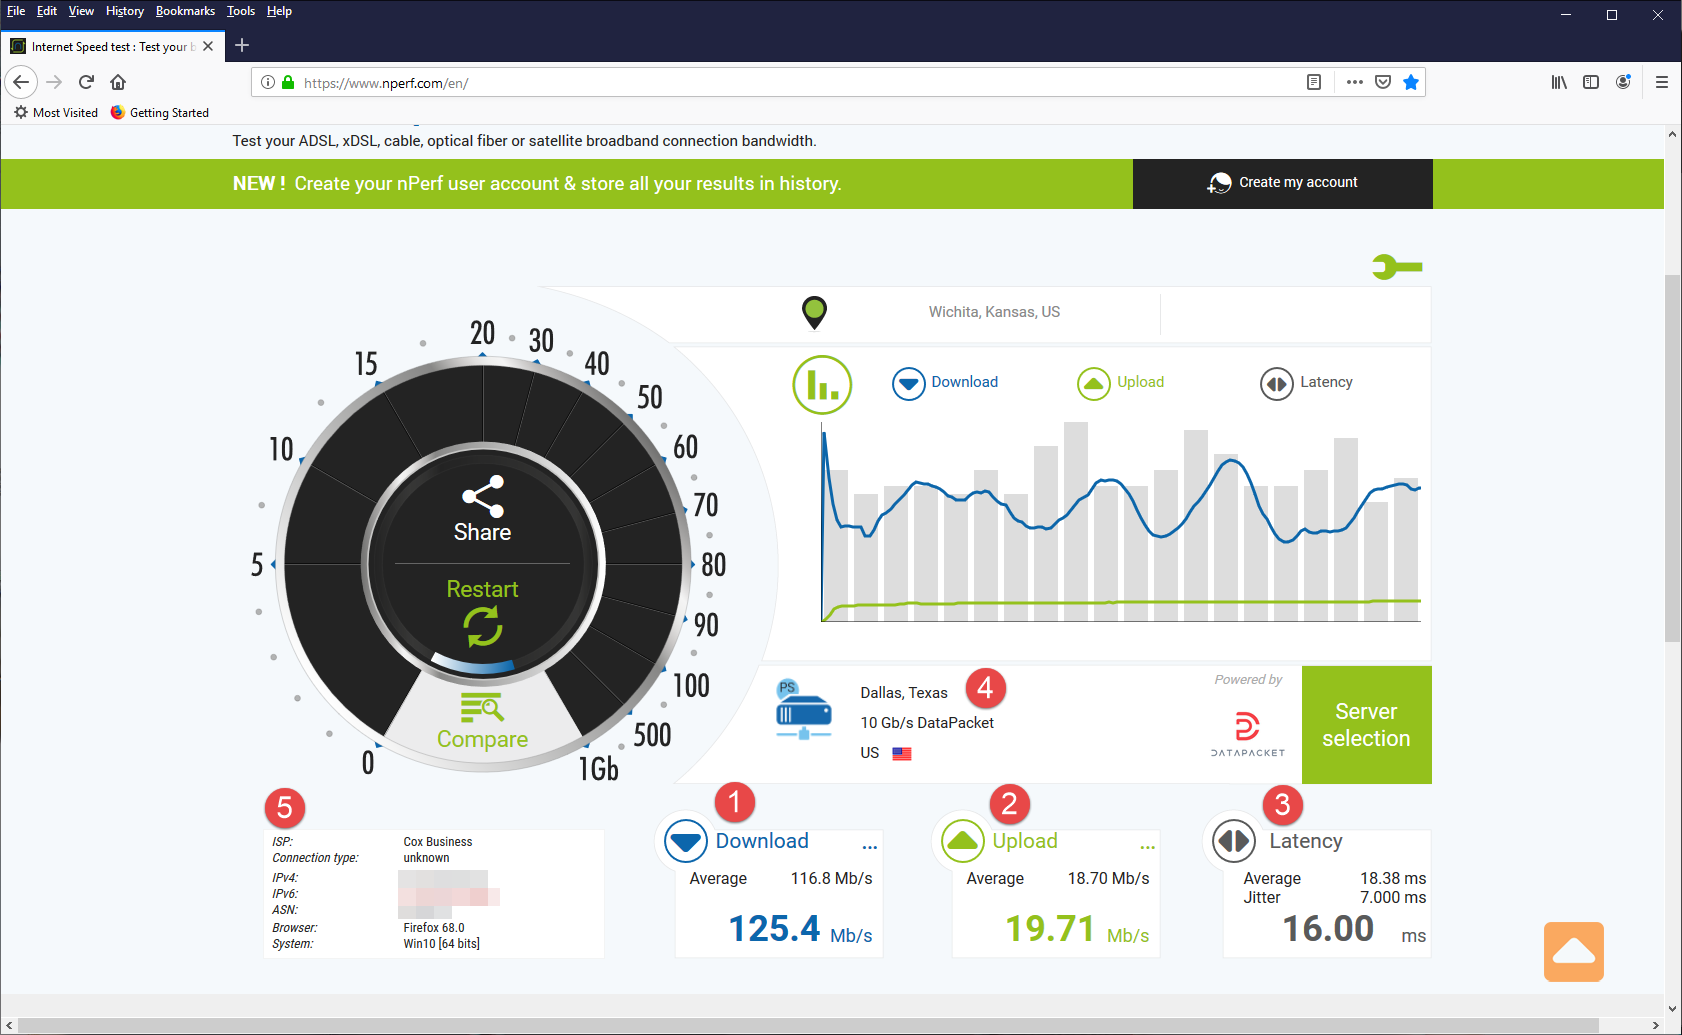 NPERF.com Speed Test Results page